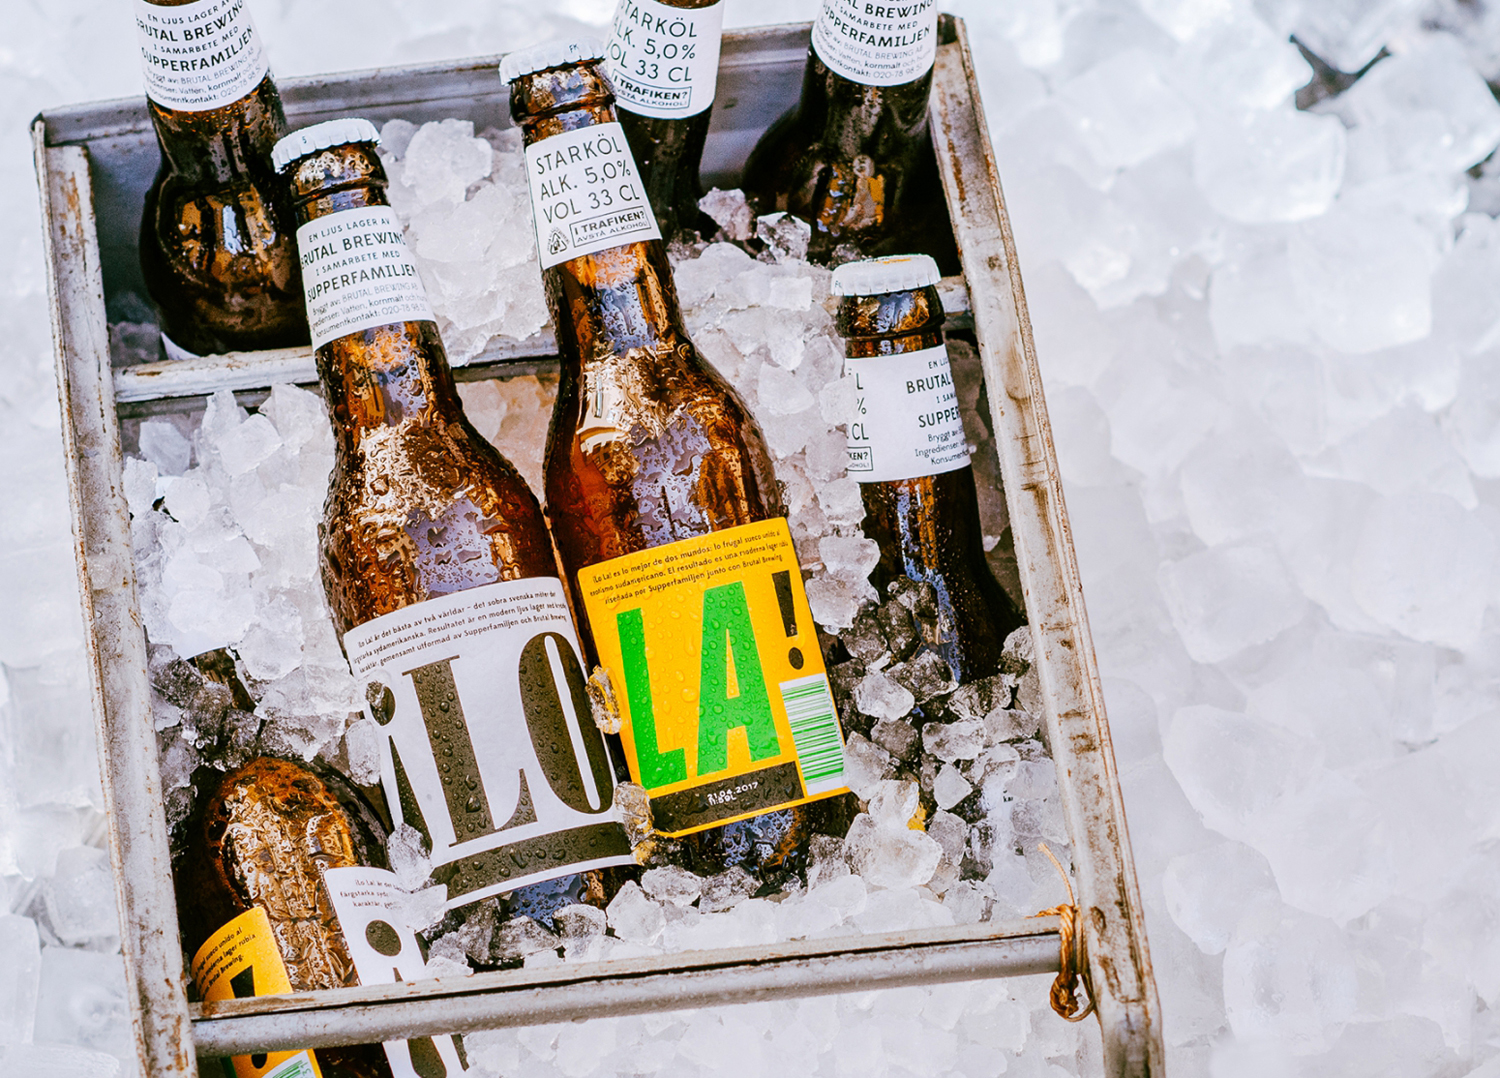 Packaging design for craft beer ¡Lo La! by Neumeister